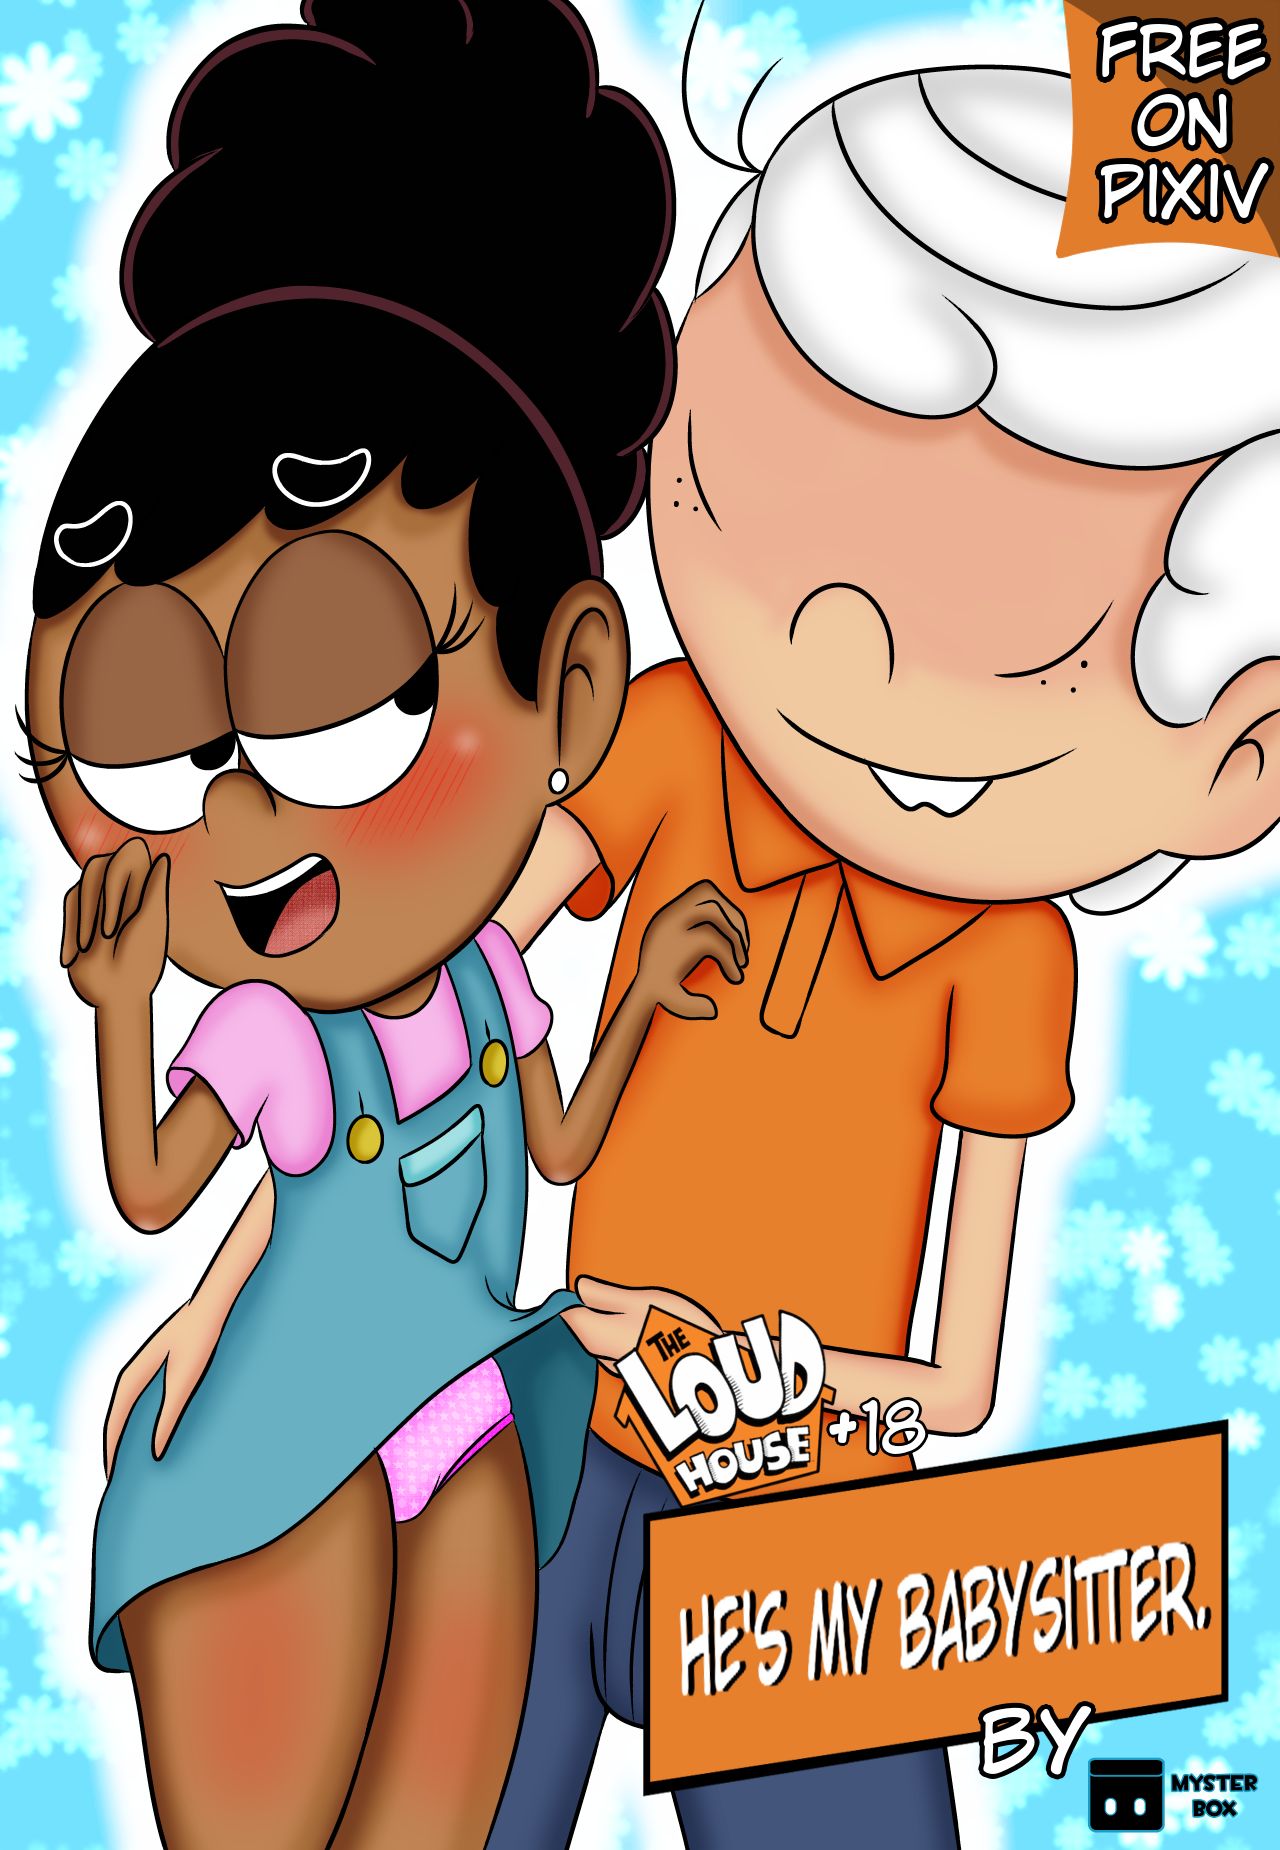 He’s My Babysitter - The Loud House by MysterBox 